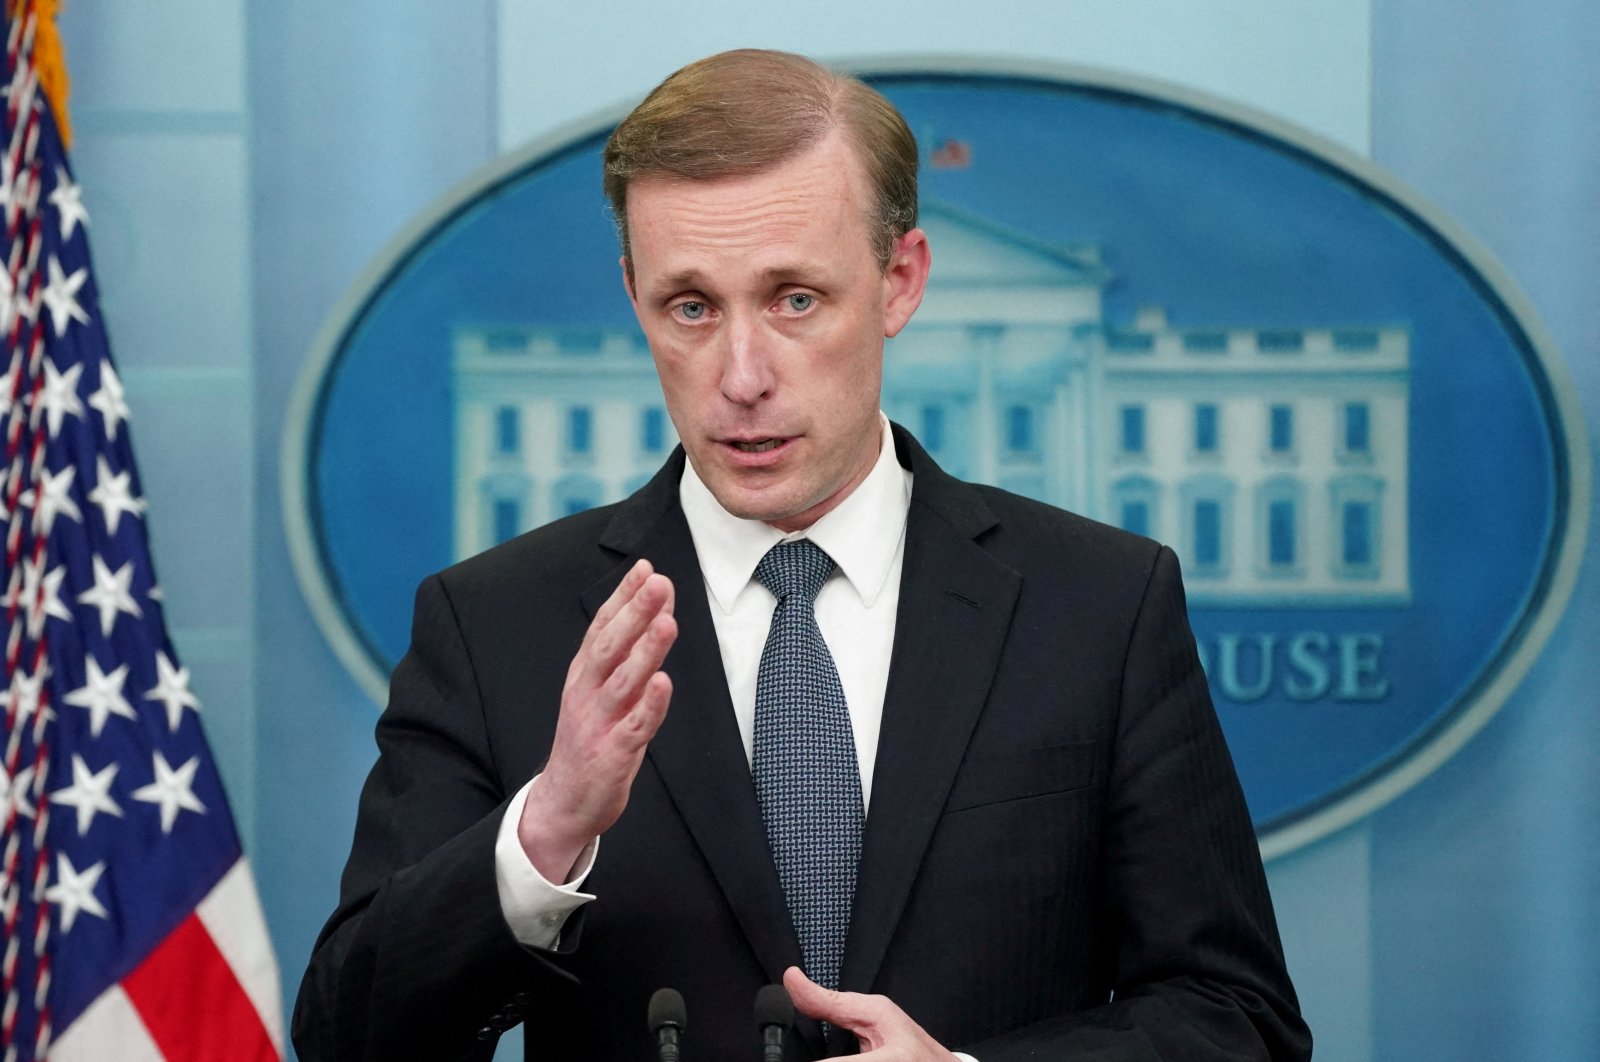 U.S. national security adviser, Jake Sullivan, speaks at a press briefing at the White House, Washington, U.S., July 11, 2022. (Reuters Photo)